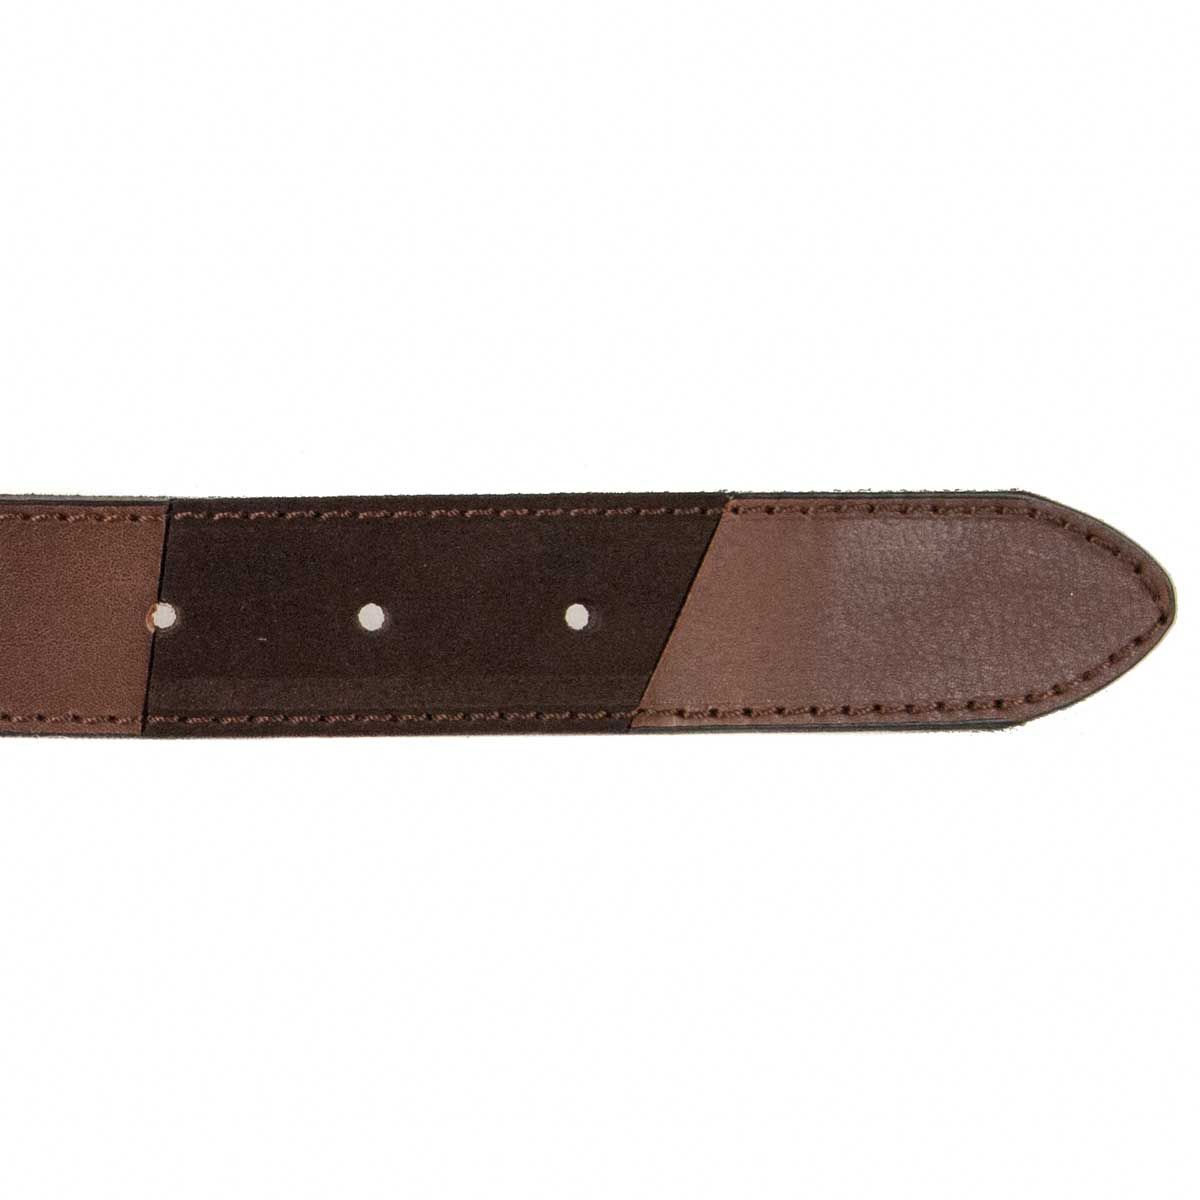 Capsule collection Emilio Faraoni. Women's belt made of 100% natural skin with an elegant and modern design by its various textures, customizable, with metal square buckle in very current silver. MADE IN SPAIN.